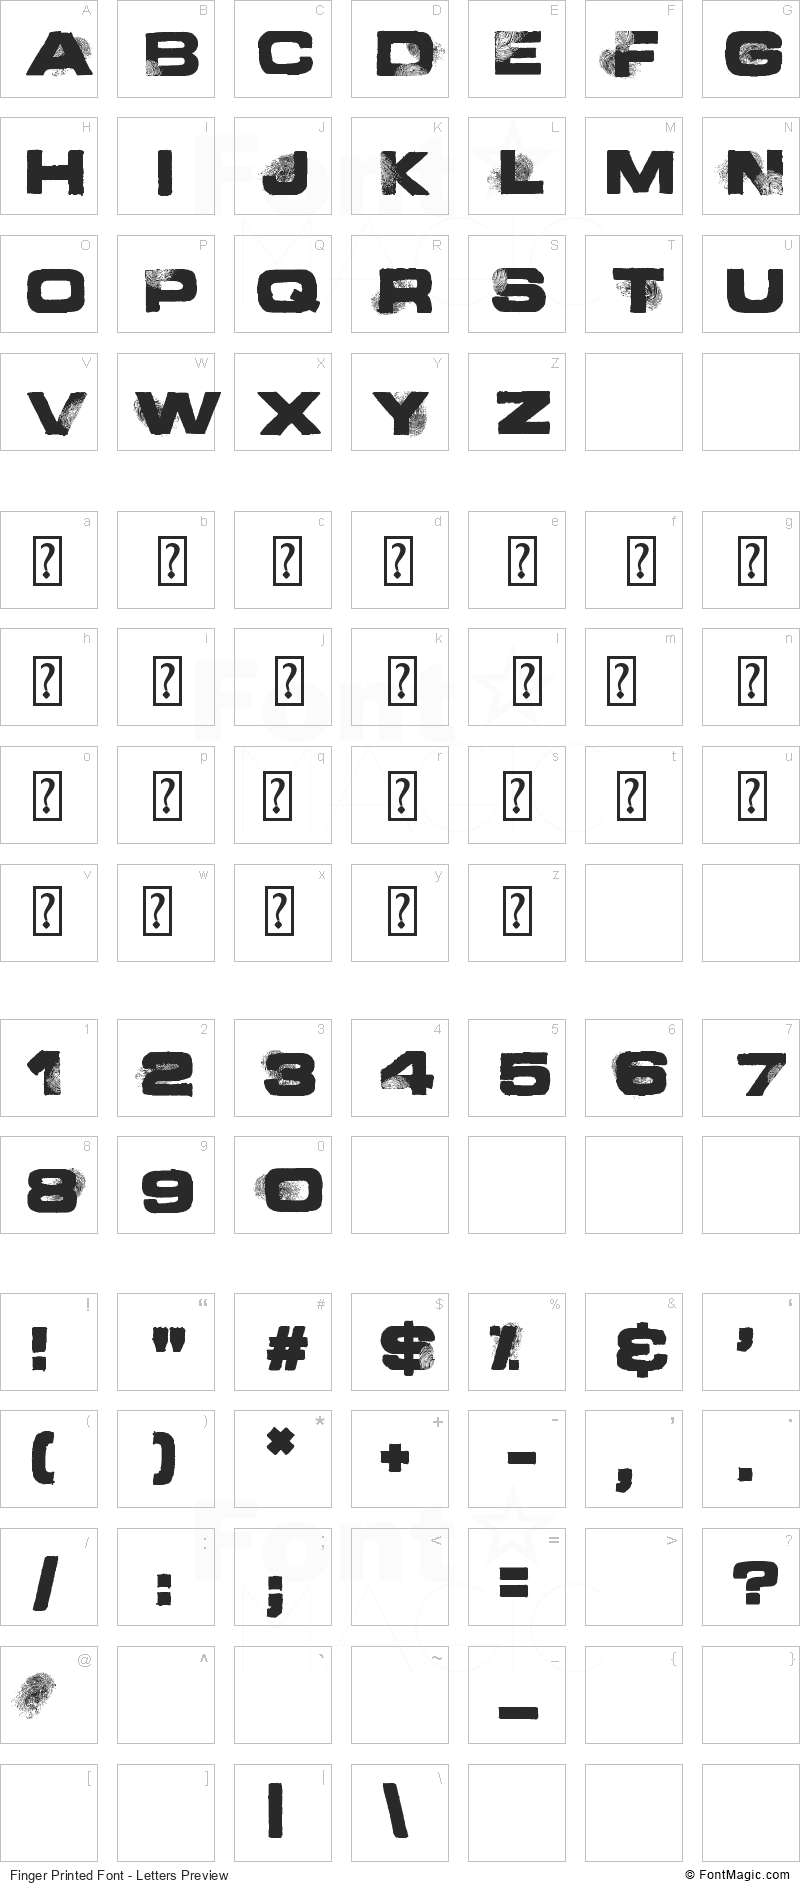 Finger Printed Font - All Latters Preview Chart